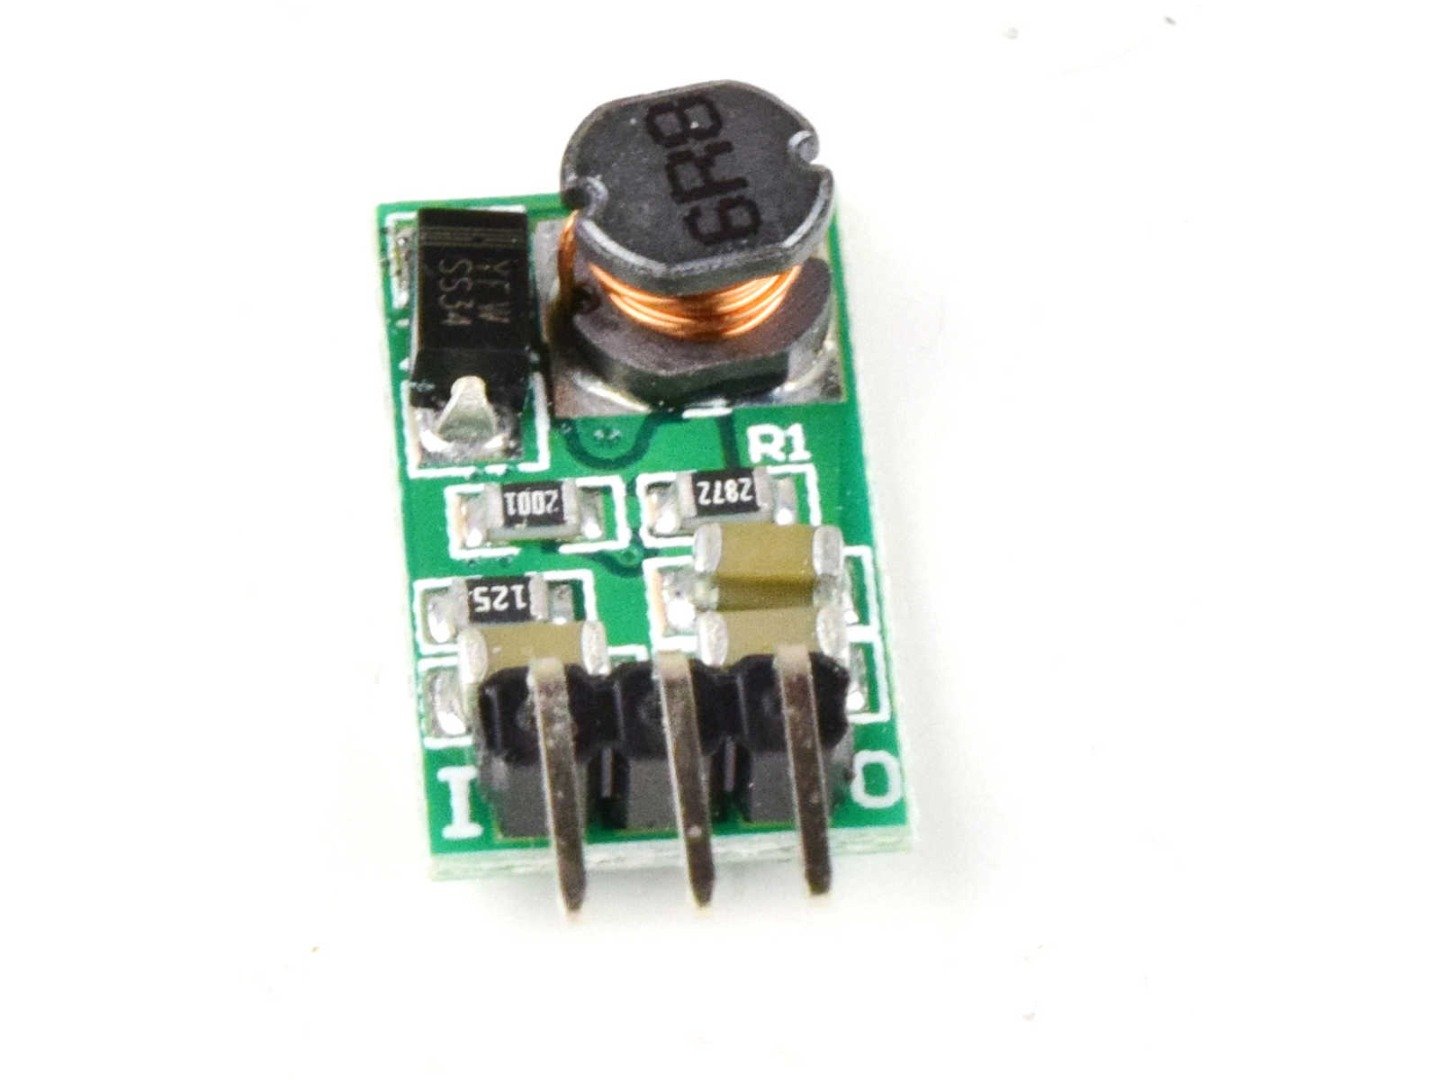 DC-DC Switching Regulator 5V 1A – TO-220 pinout – 7805 Replacement 6